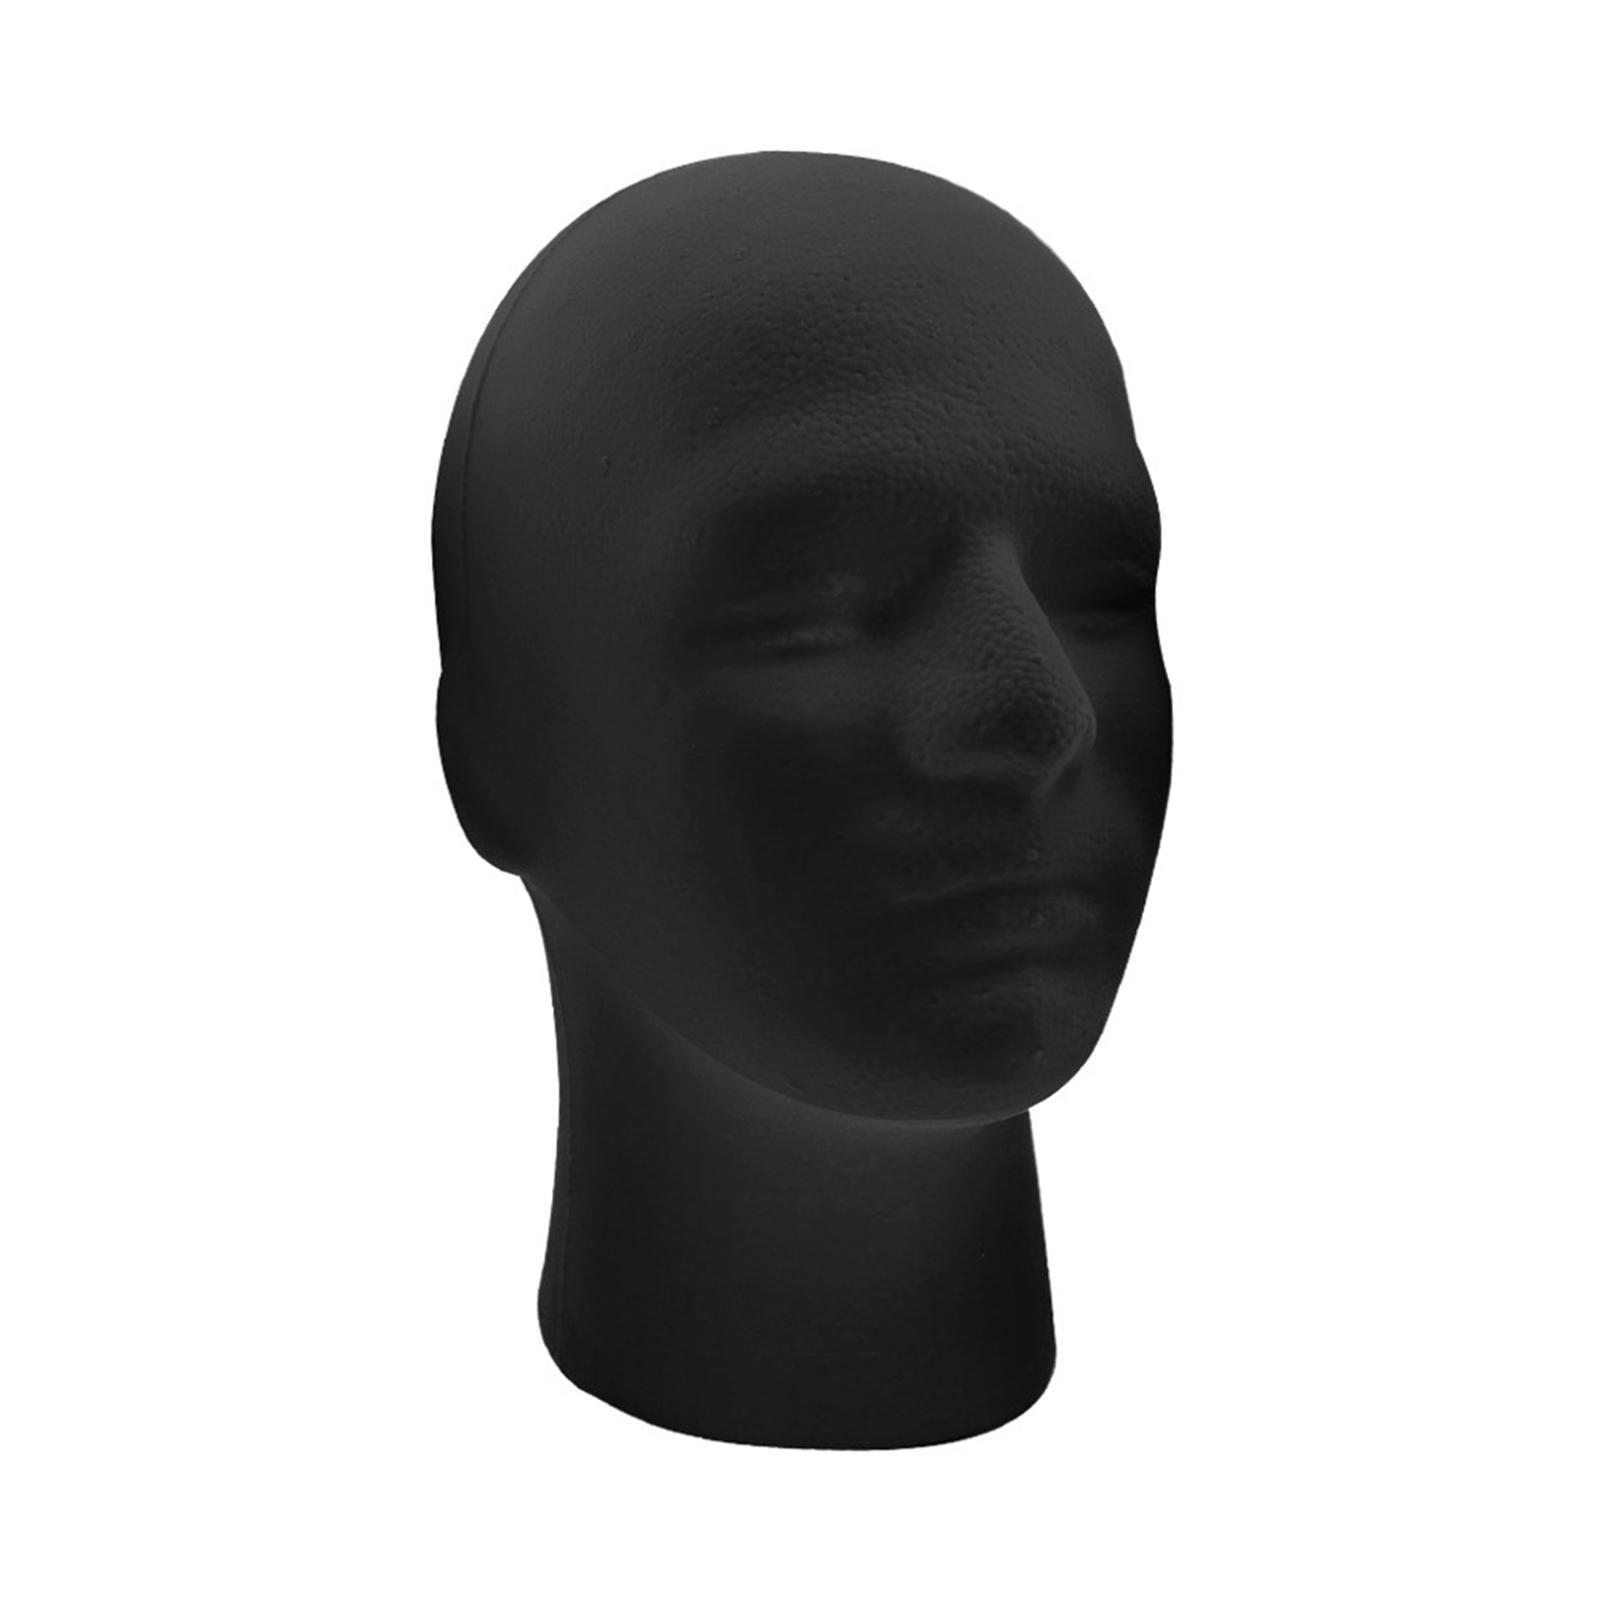 Man'S Head Display Stand Male Stand Model Foam Stable Black Sturdy Round Base Mannequin Head Display Stand for Display Headwear Styling